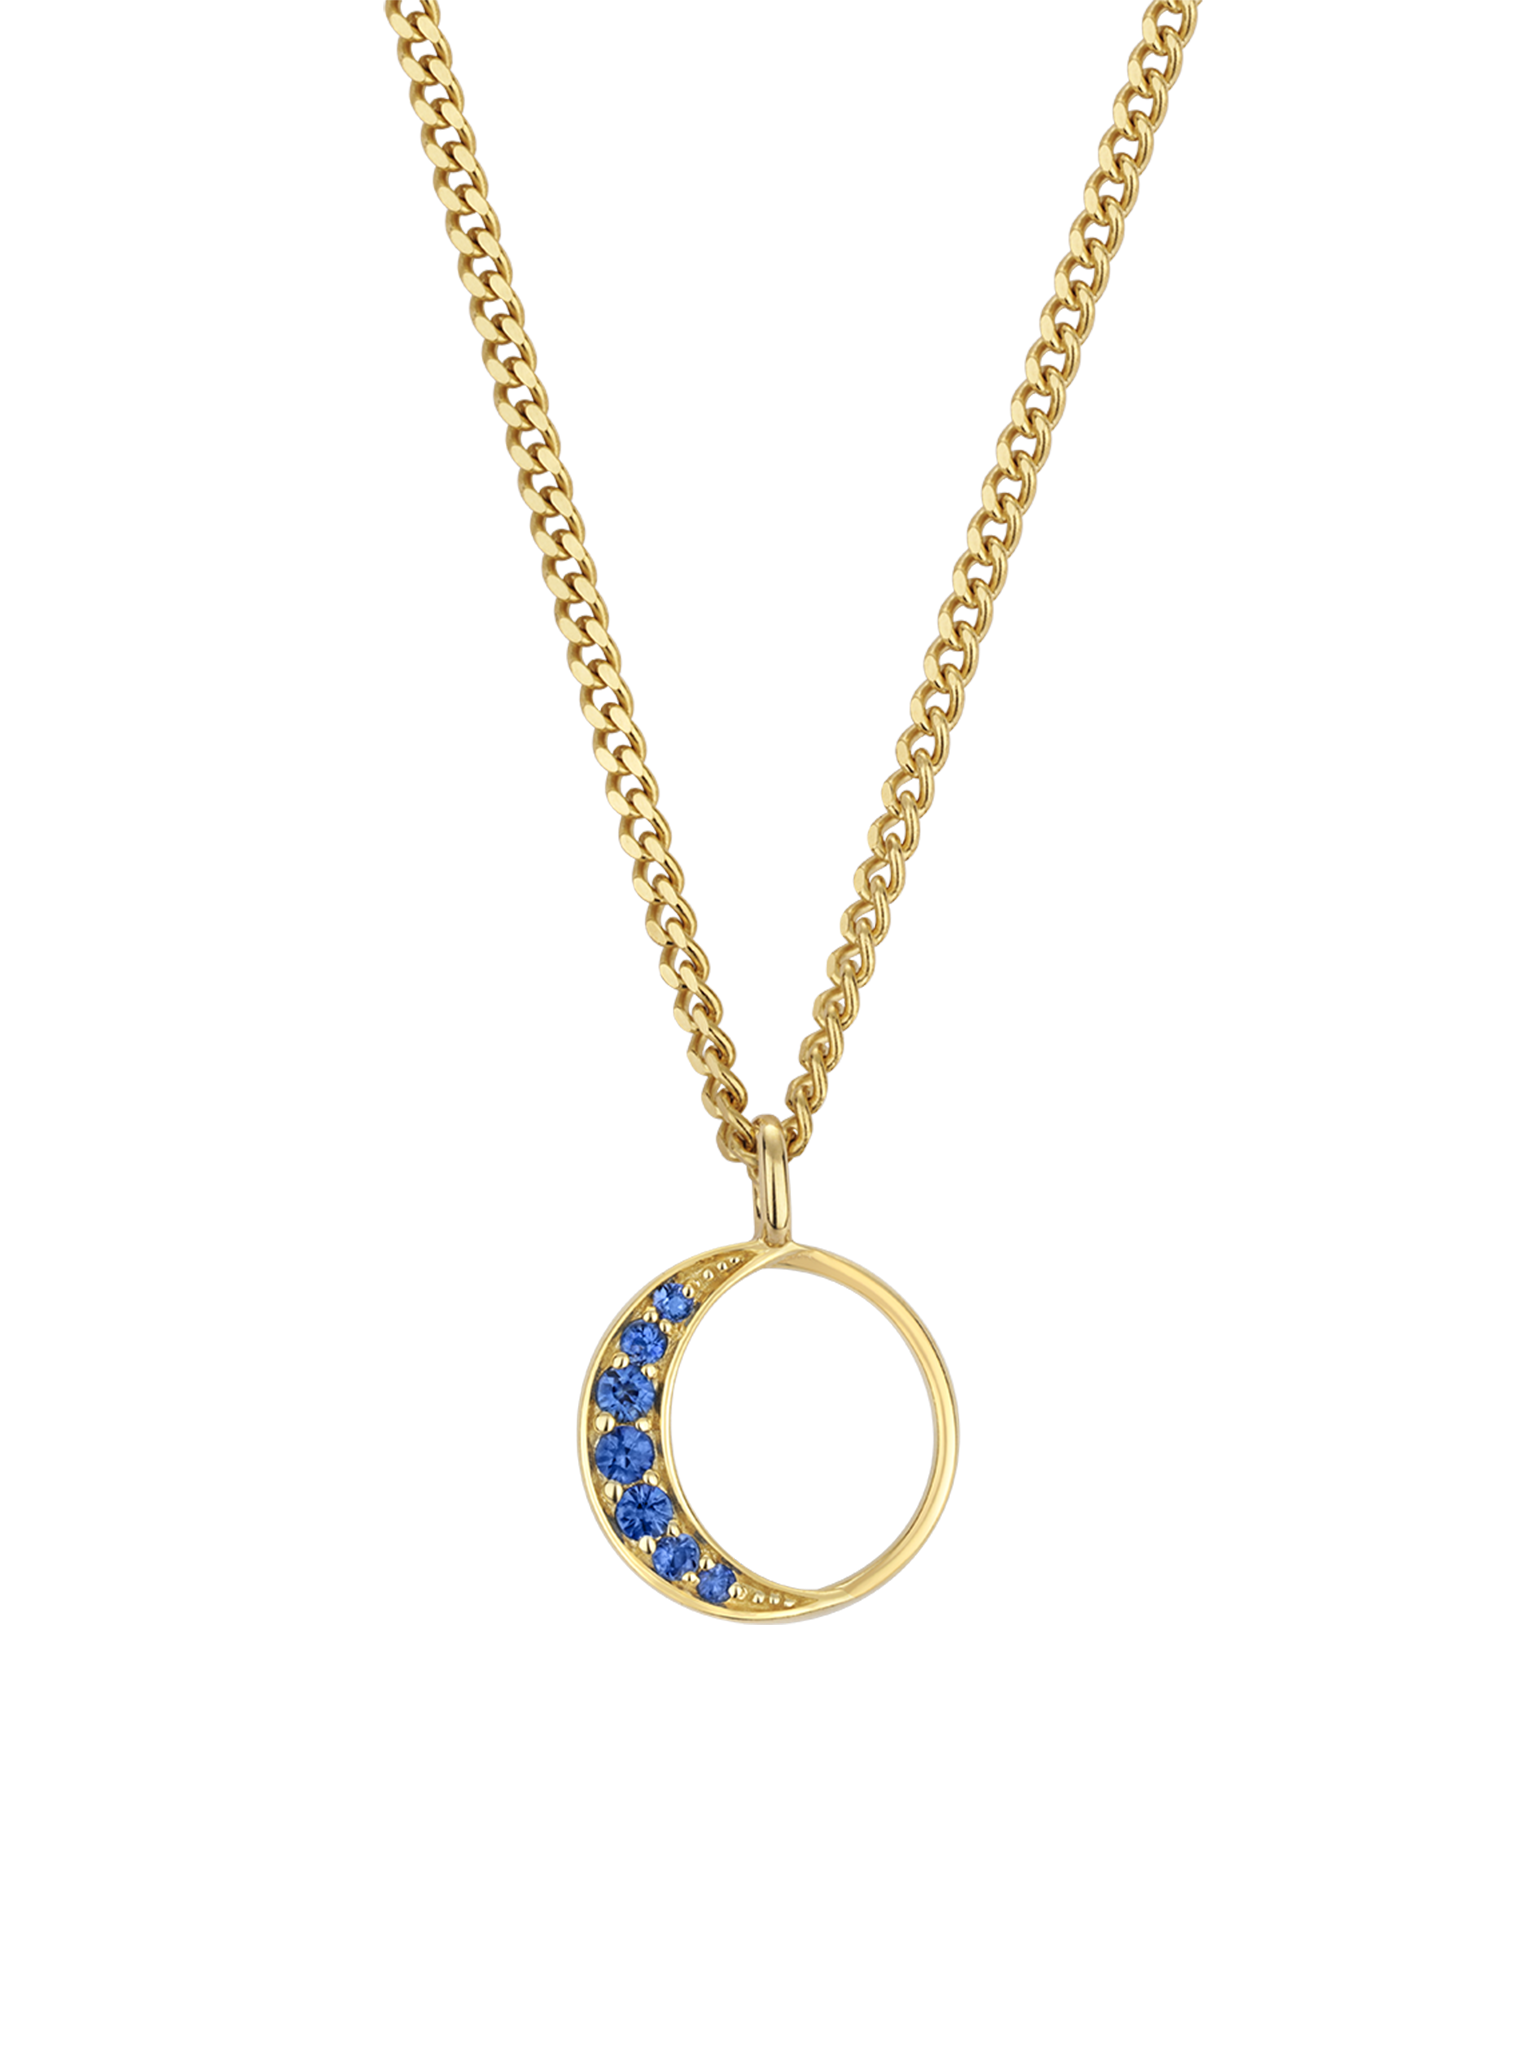 New moon blue sapphire necklace